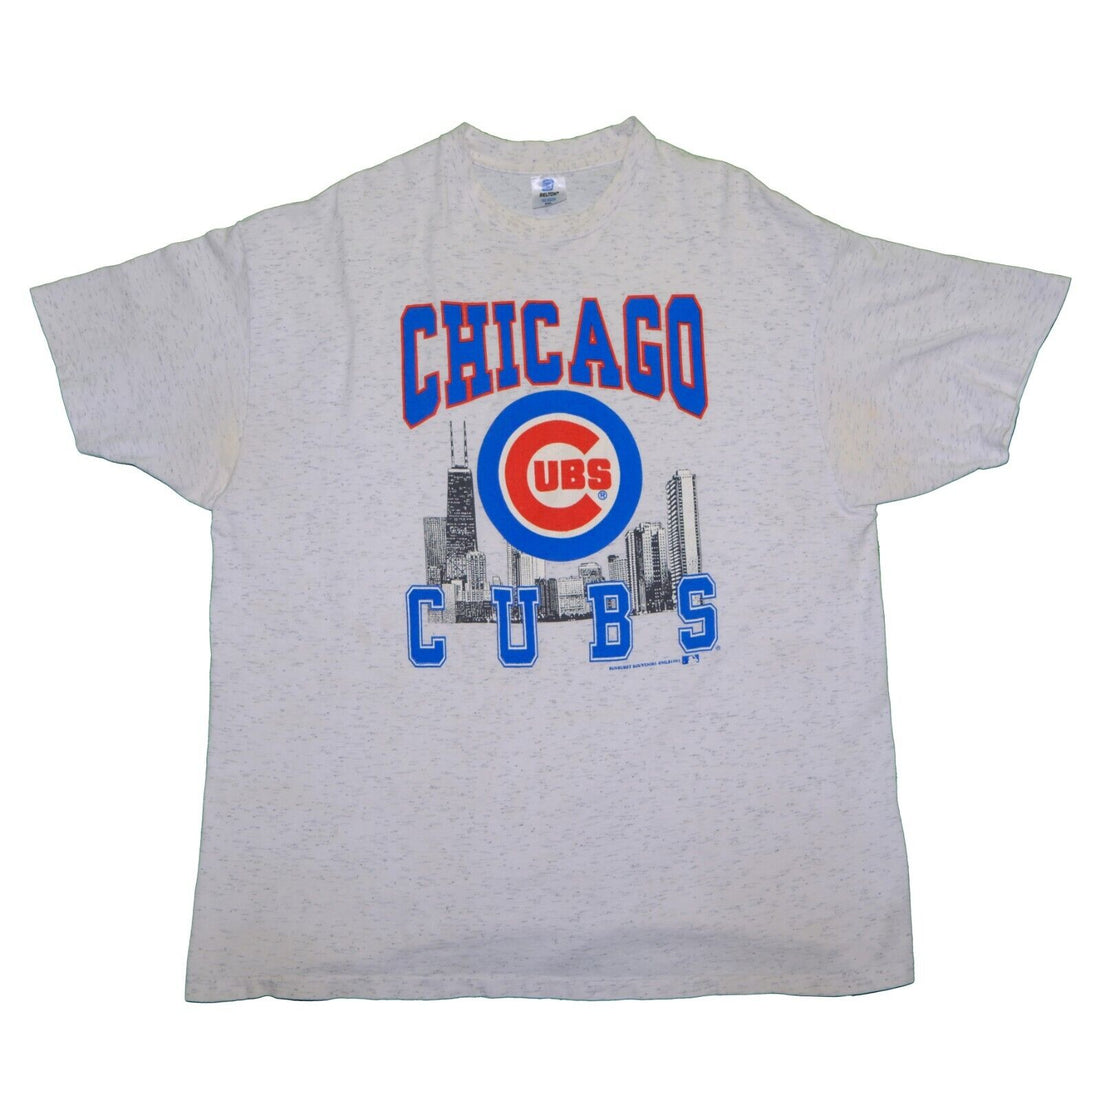 Vintage Chicago Cubs T-Shirt Size Heather Gray 2XL 1993 90s MLB